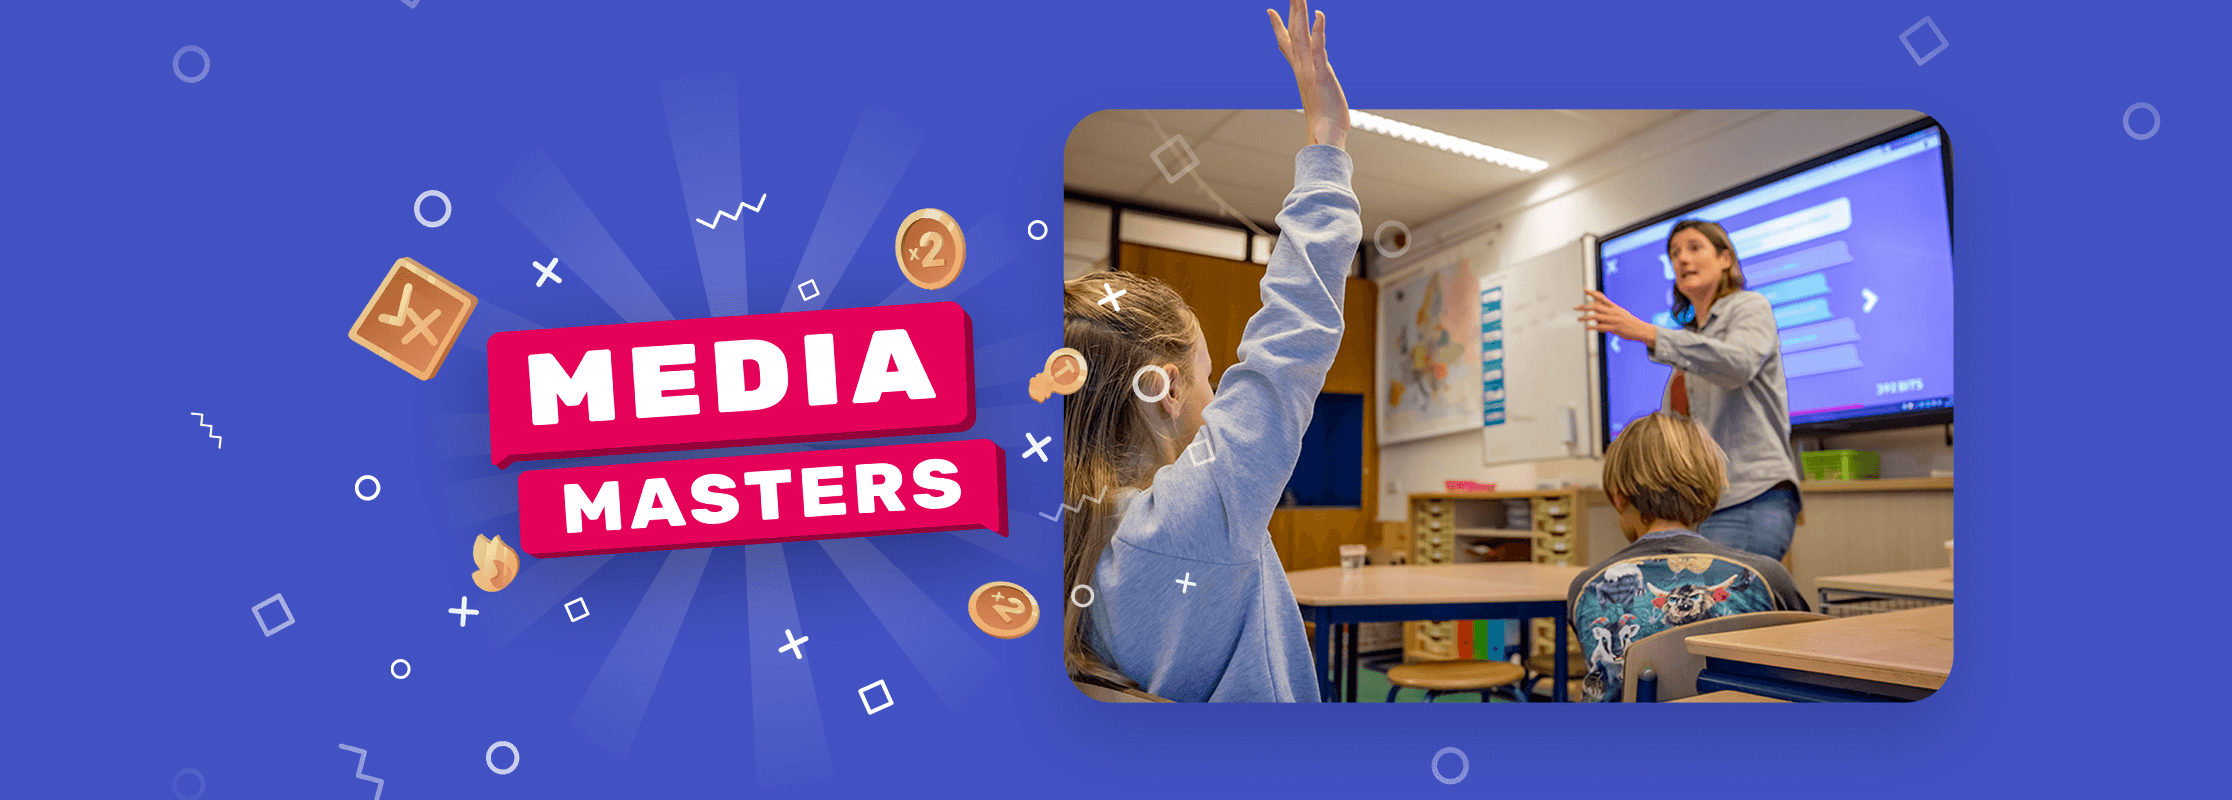 MediaMasters: a serious game in >8,000 classrooms